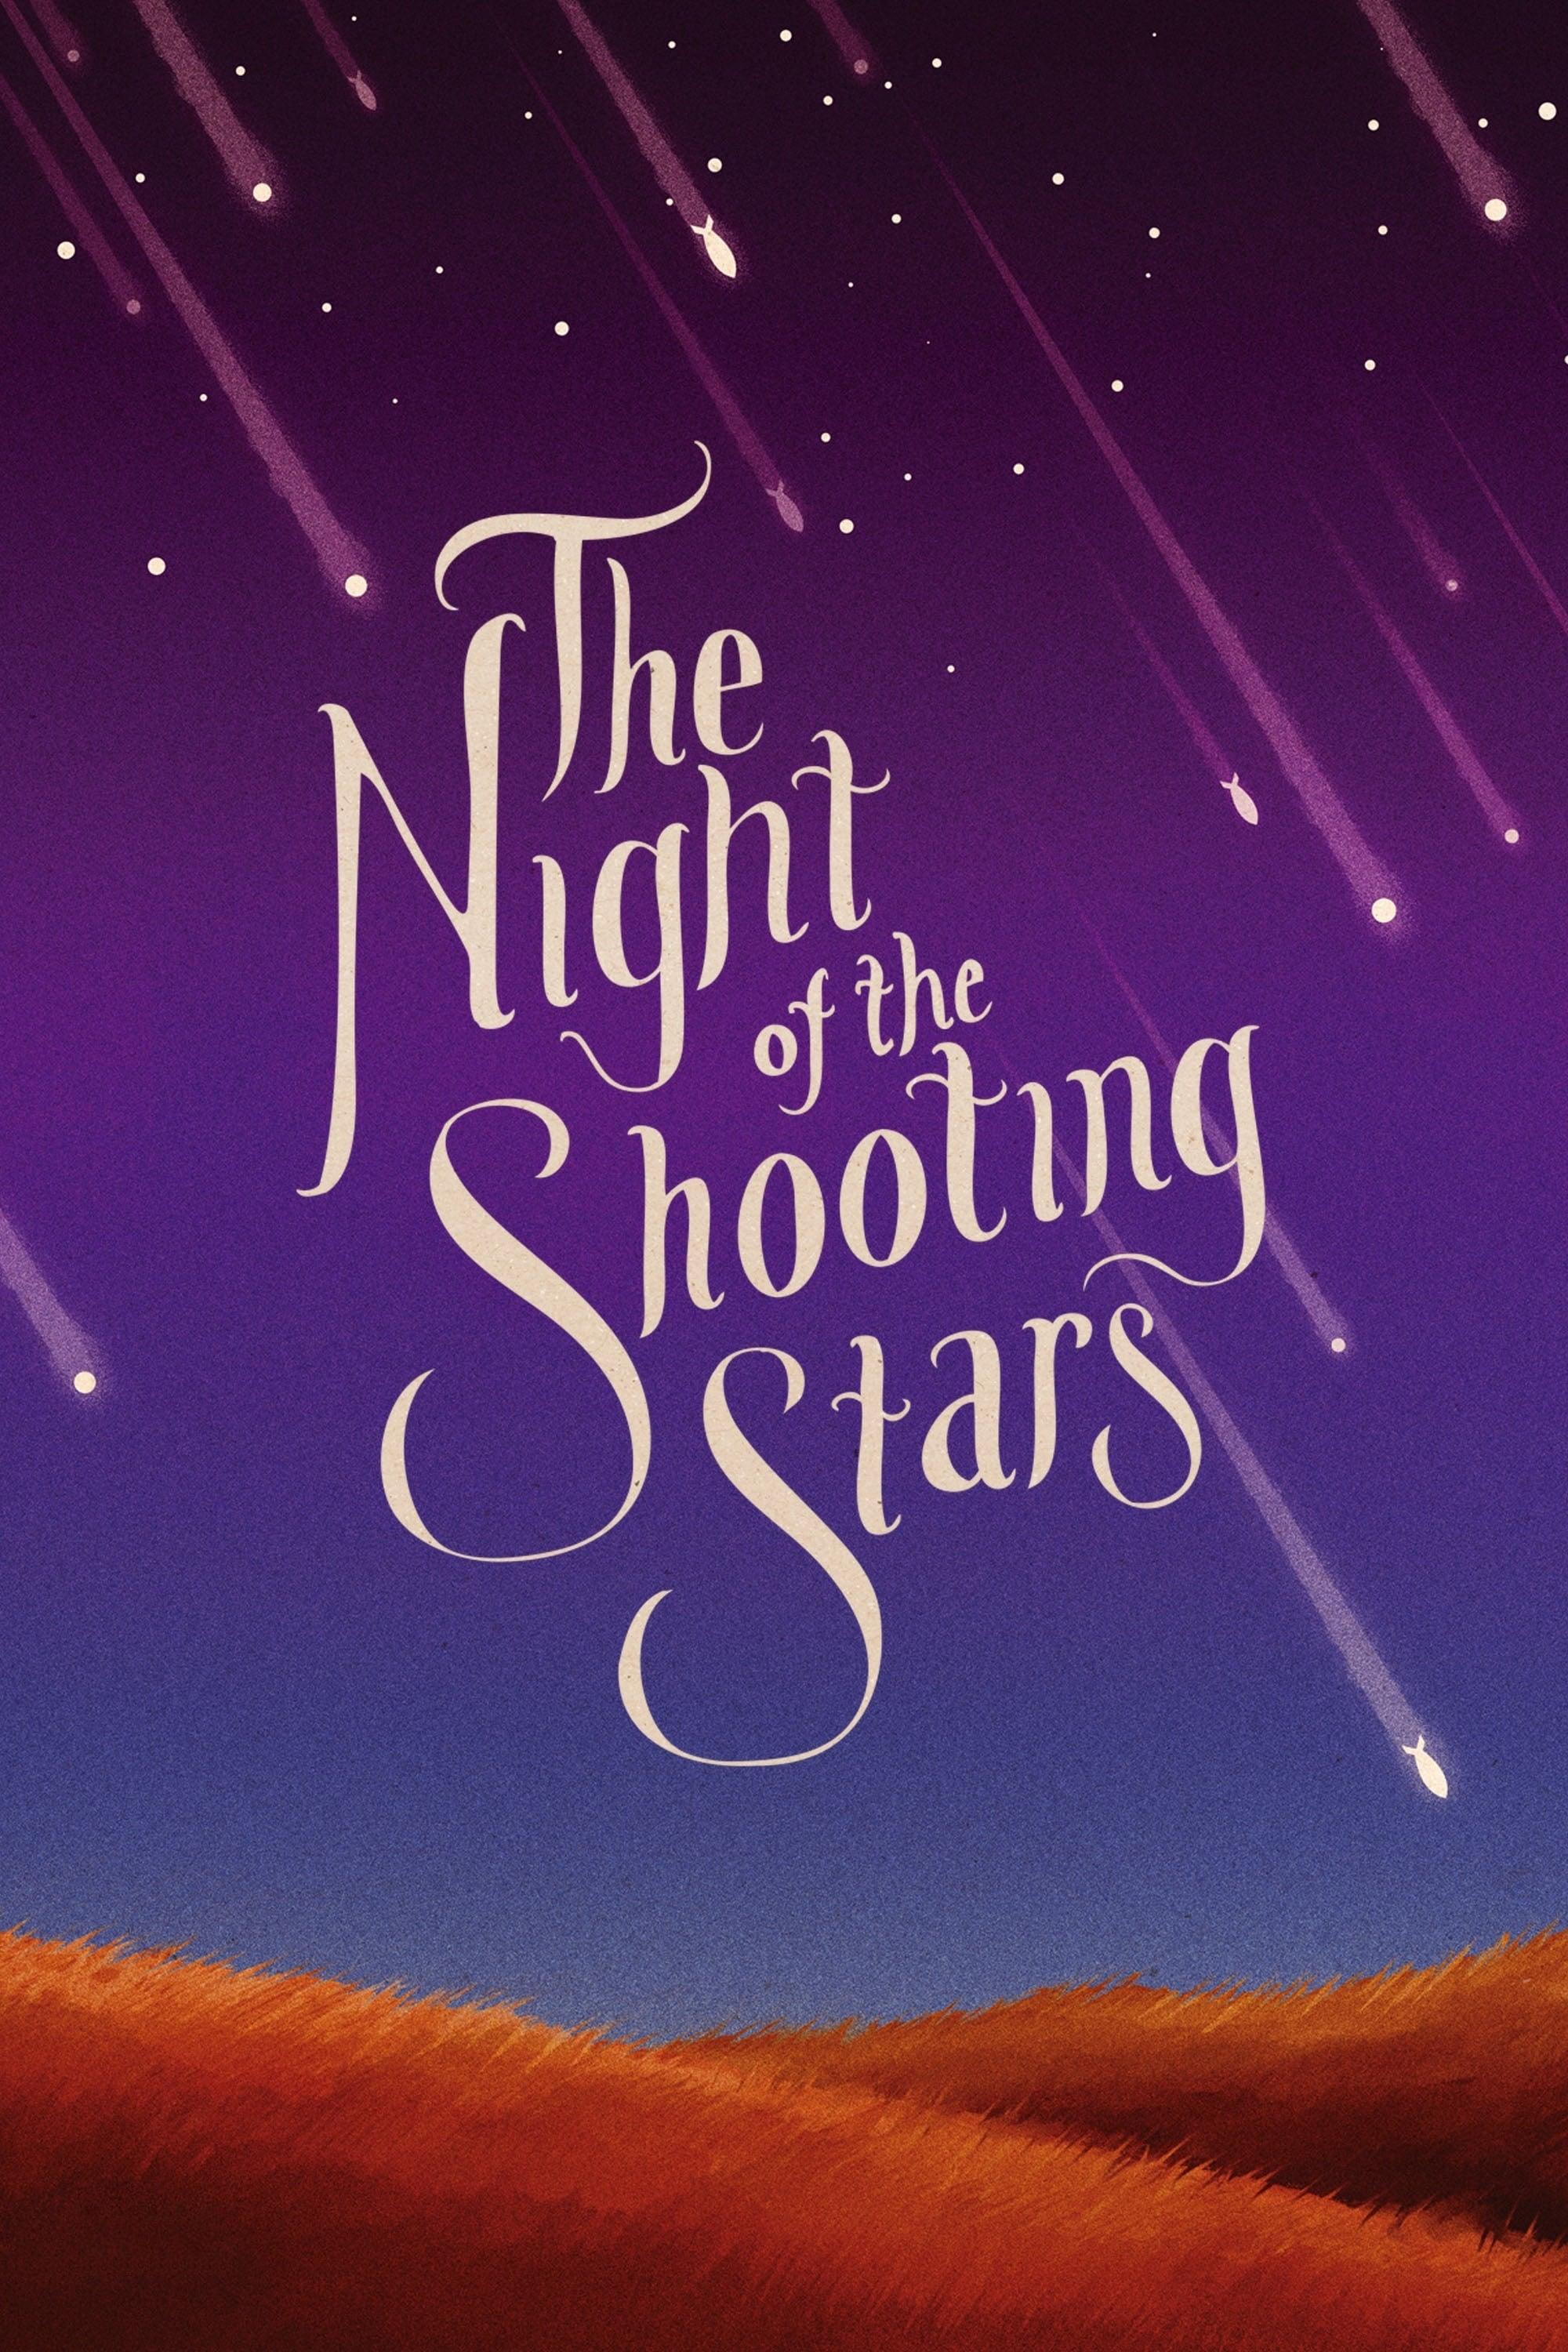 The Night of the Shooting Stars poster